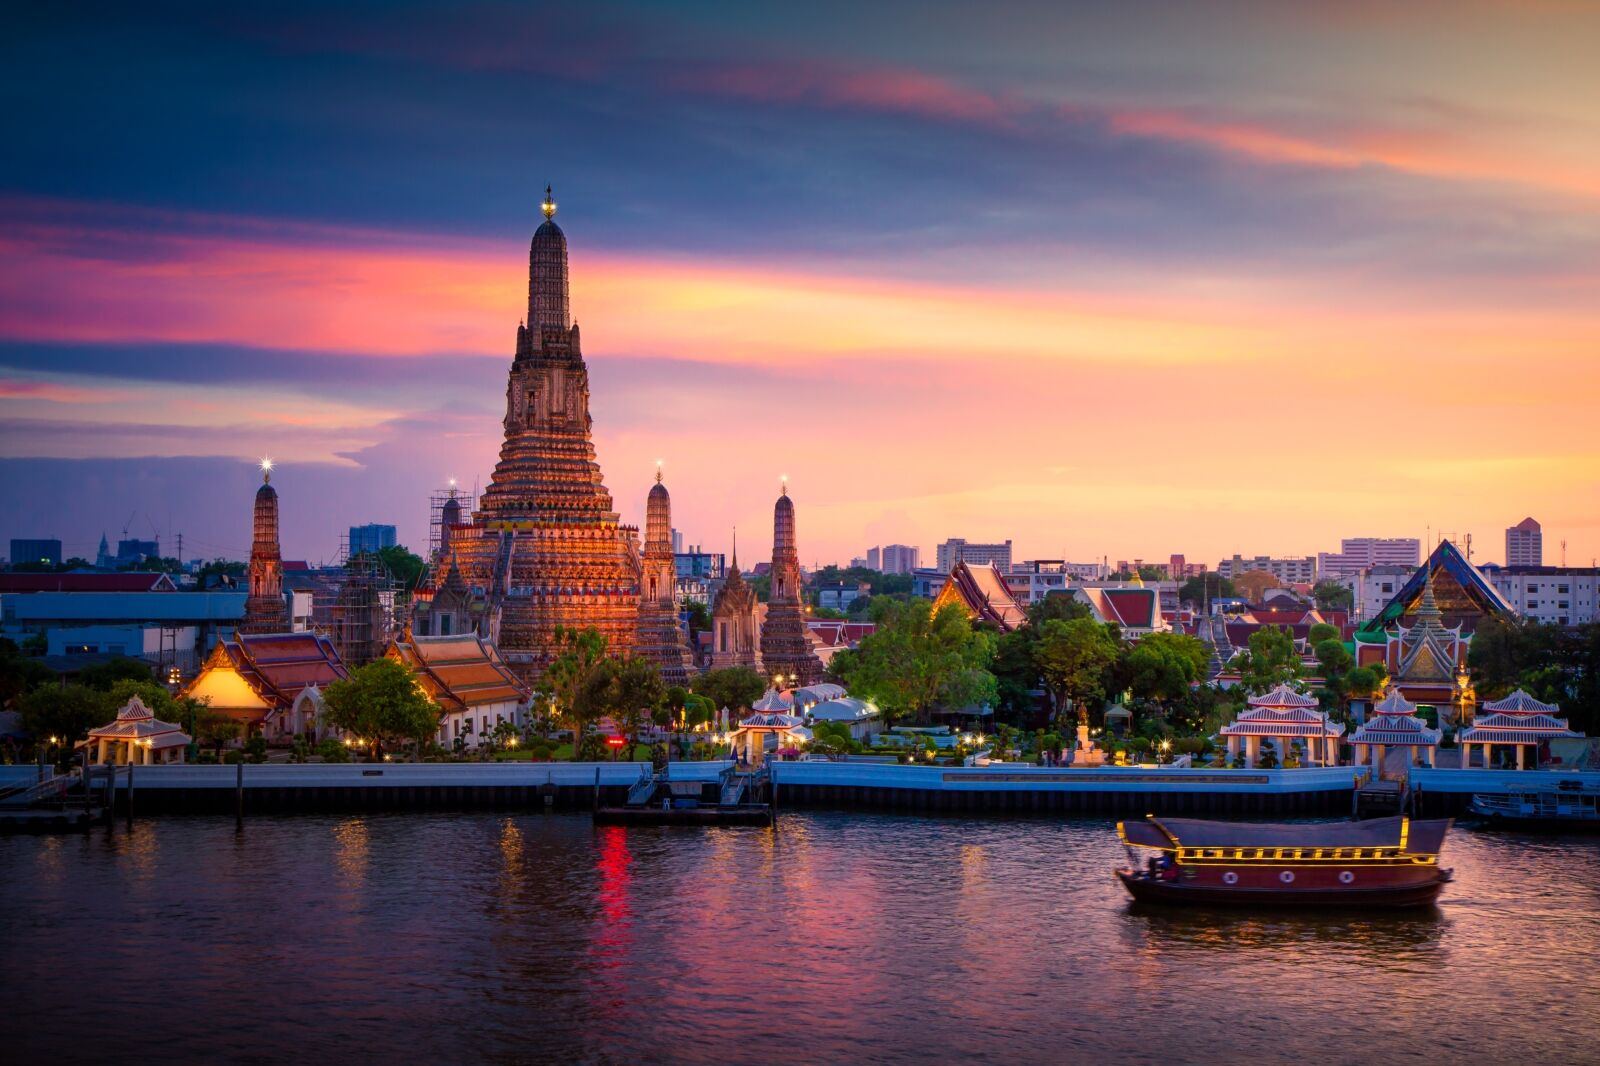 Atmosphere Of Wat Arun in twilight, It is spectacular, This is an important buddhist temple and a famous tourist destination at bangkok in thailand.